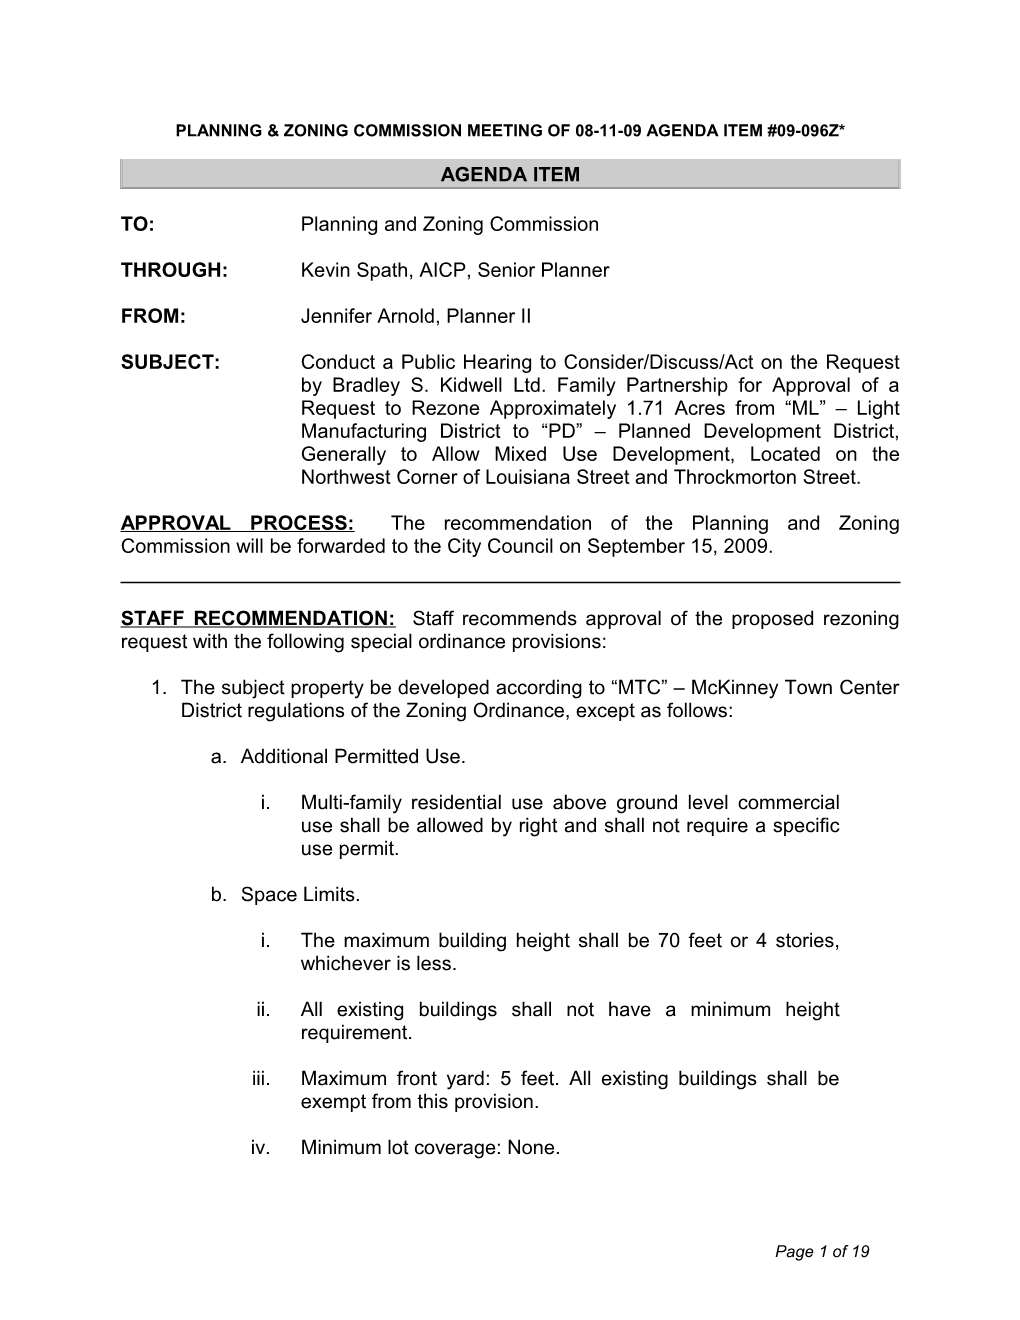 Planning & Zoning Commission Meeting of Month-Day-Year of Meeting Agenda Item #Item Number*